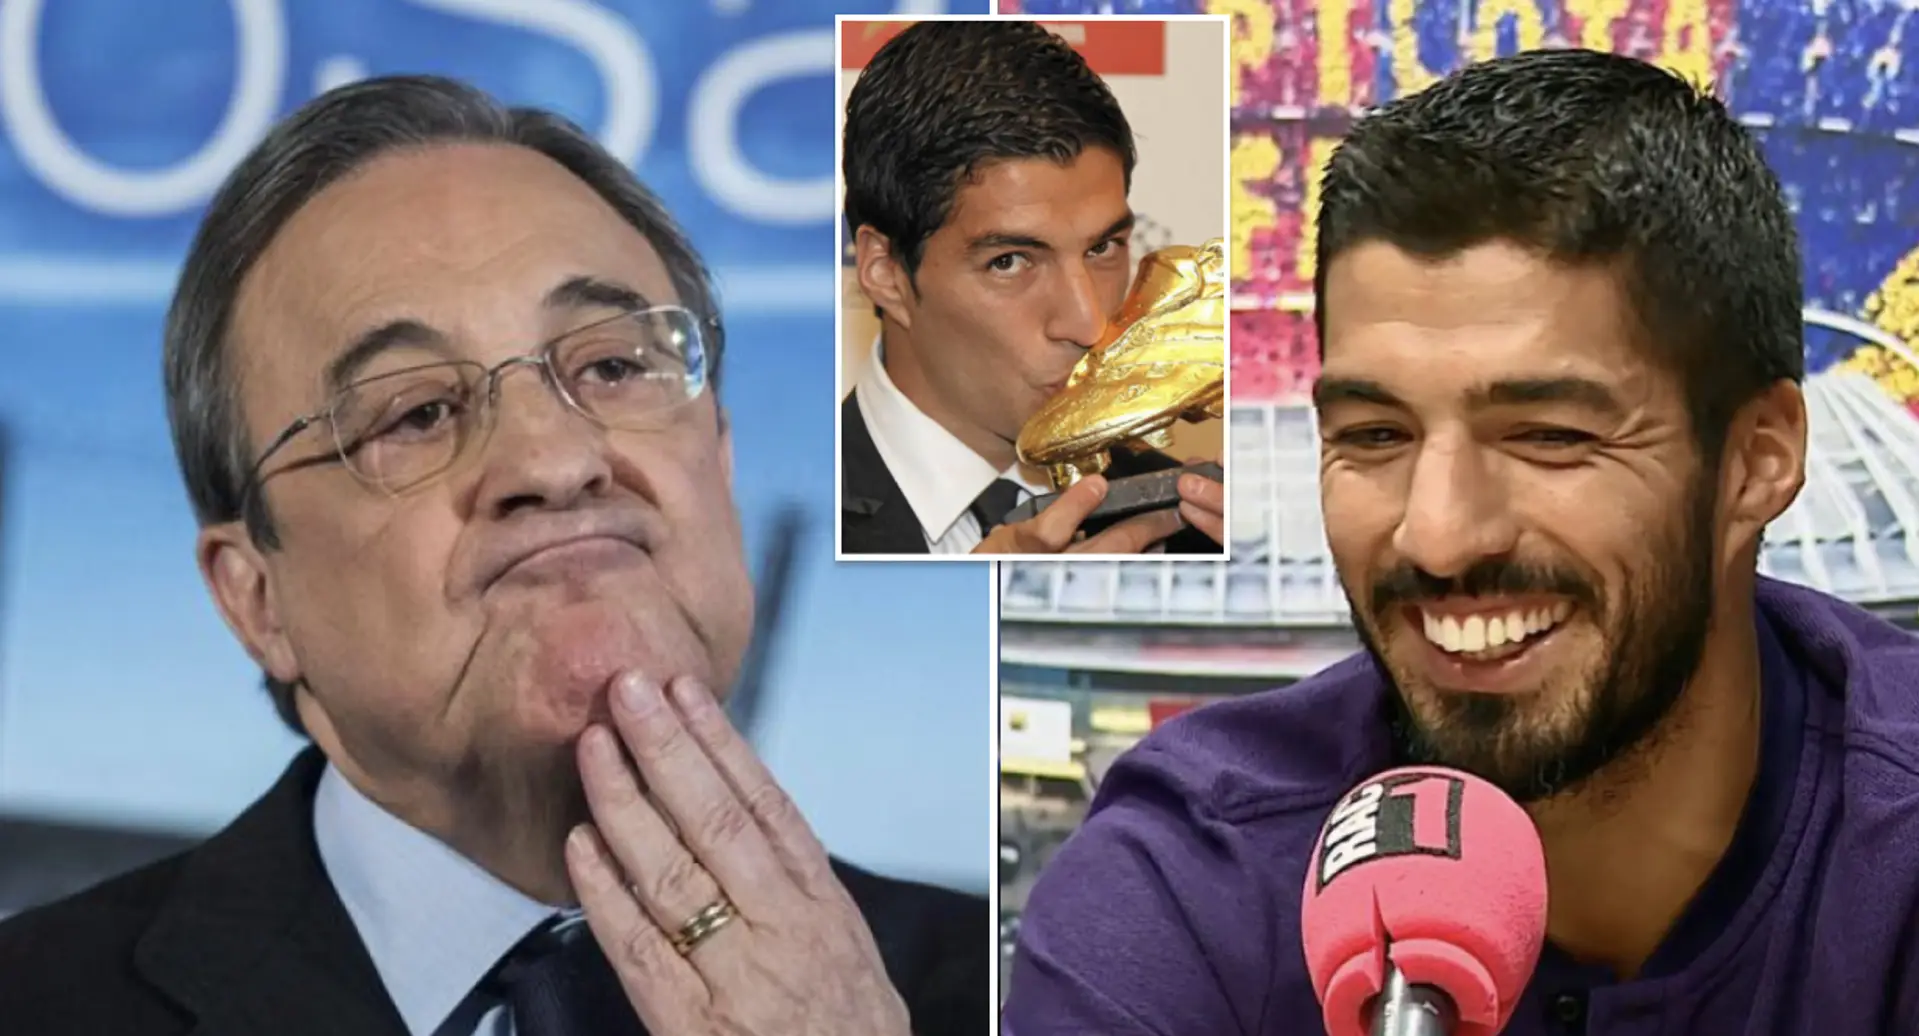 Luis Suarez reveals why he snubbed Real Madrid for Barca in 2014